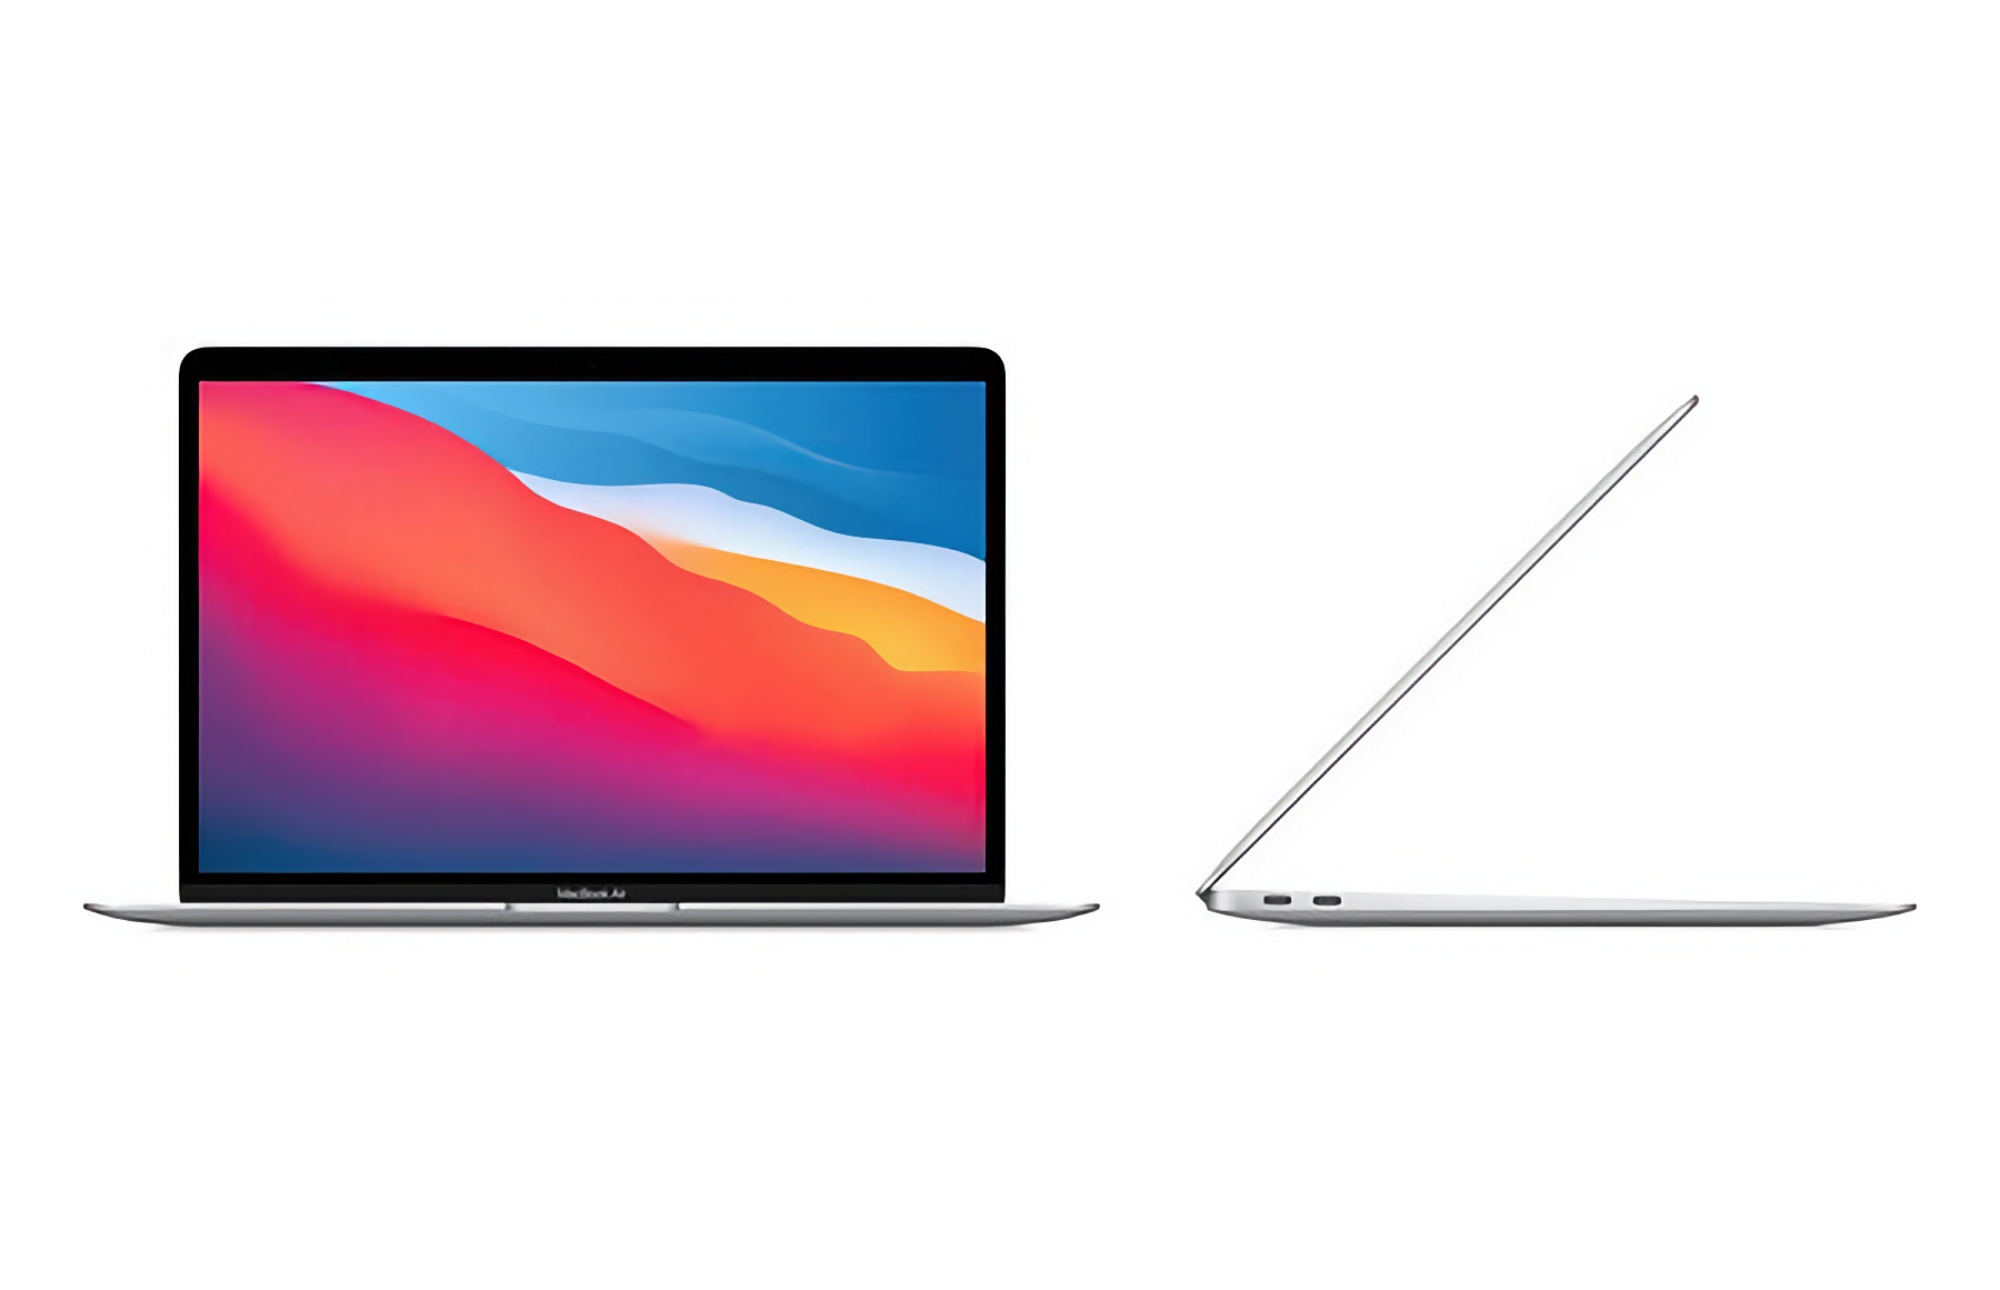 Best price: MacBook Air with M1 chip sells for less than $800 on Amazon